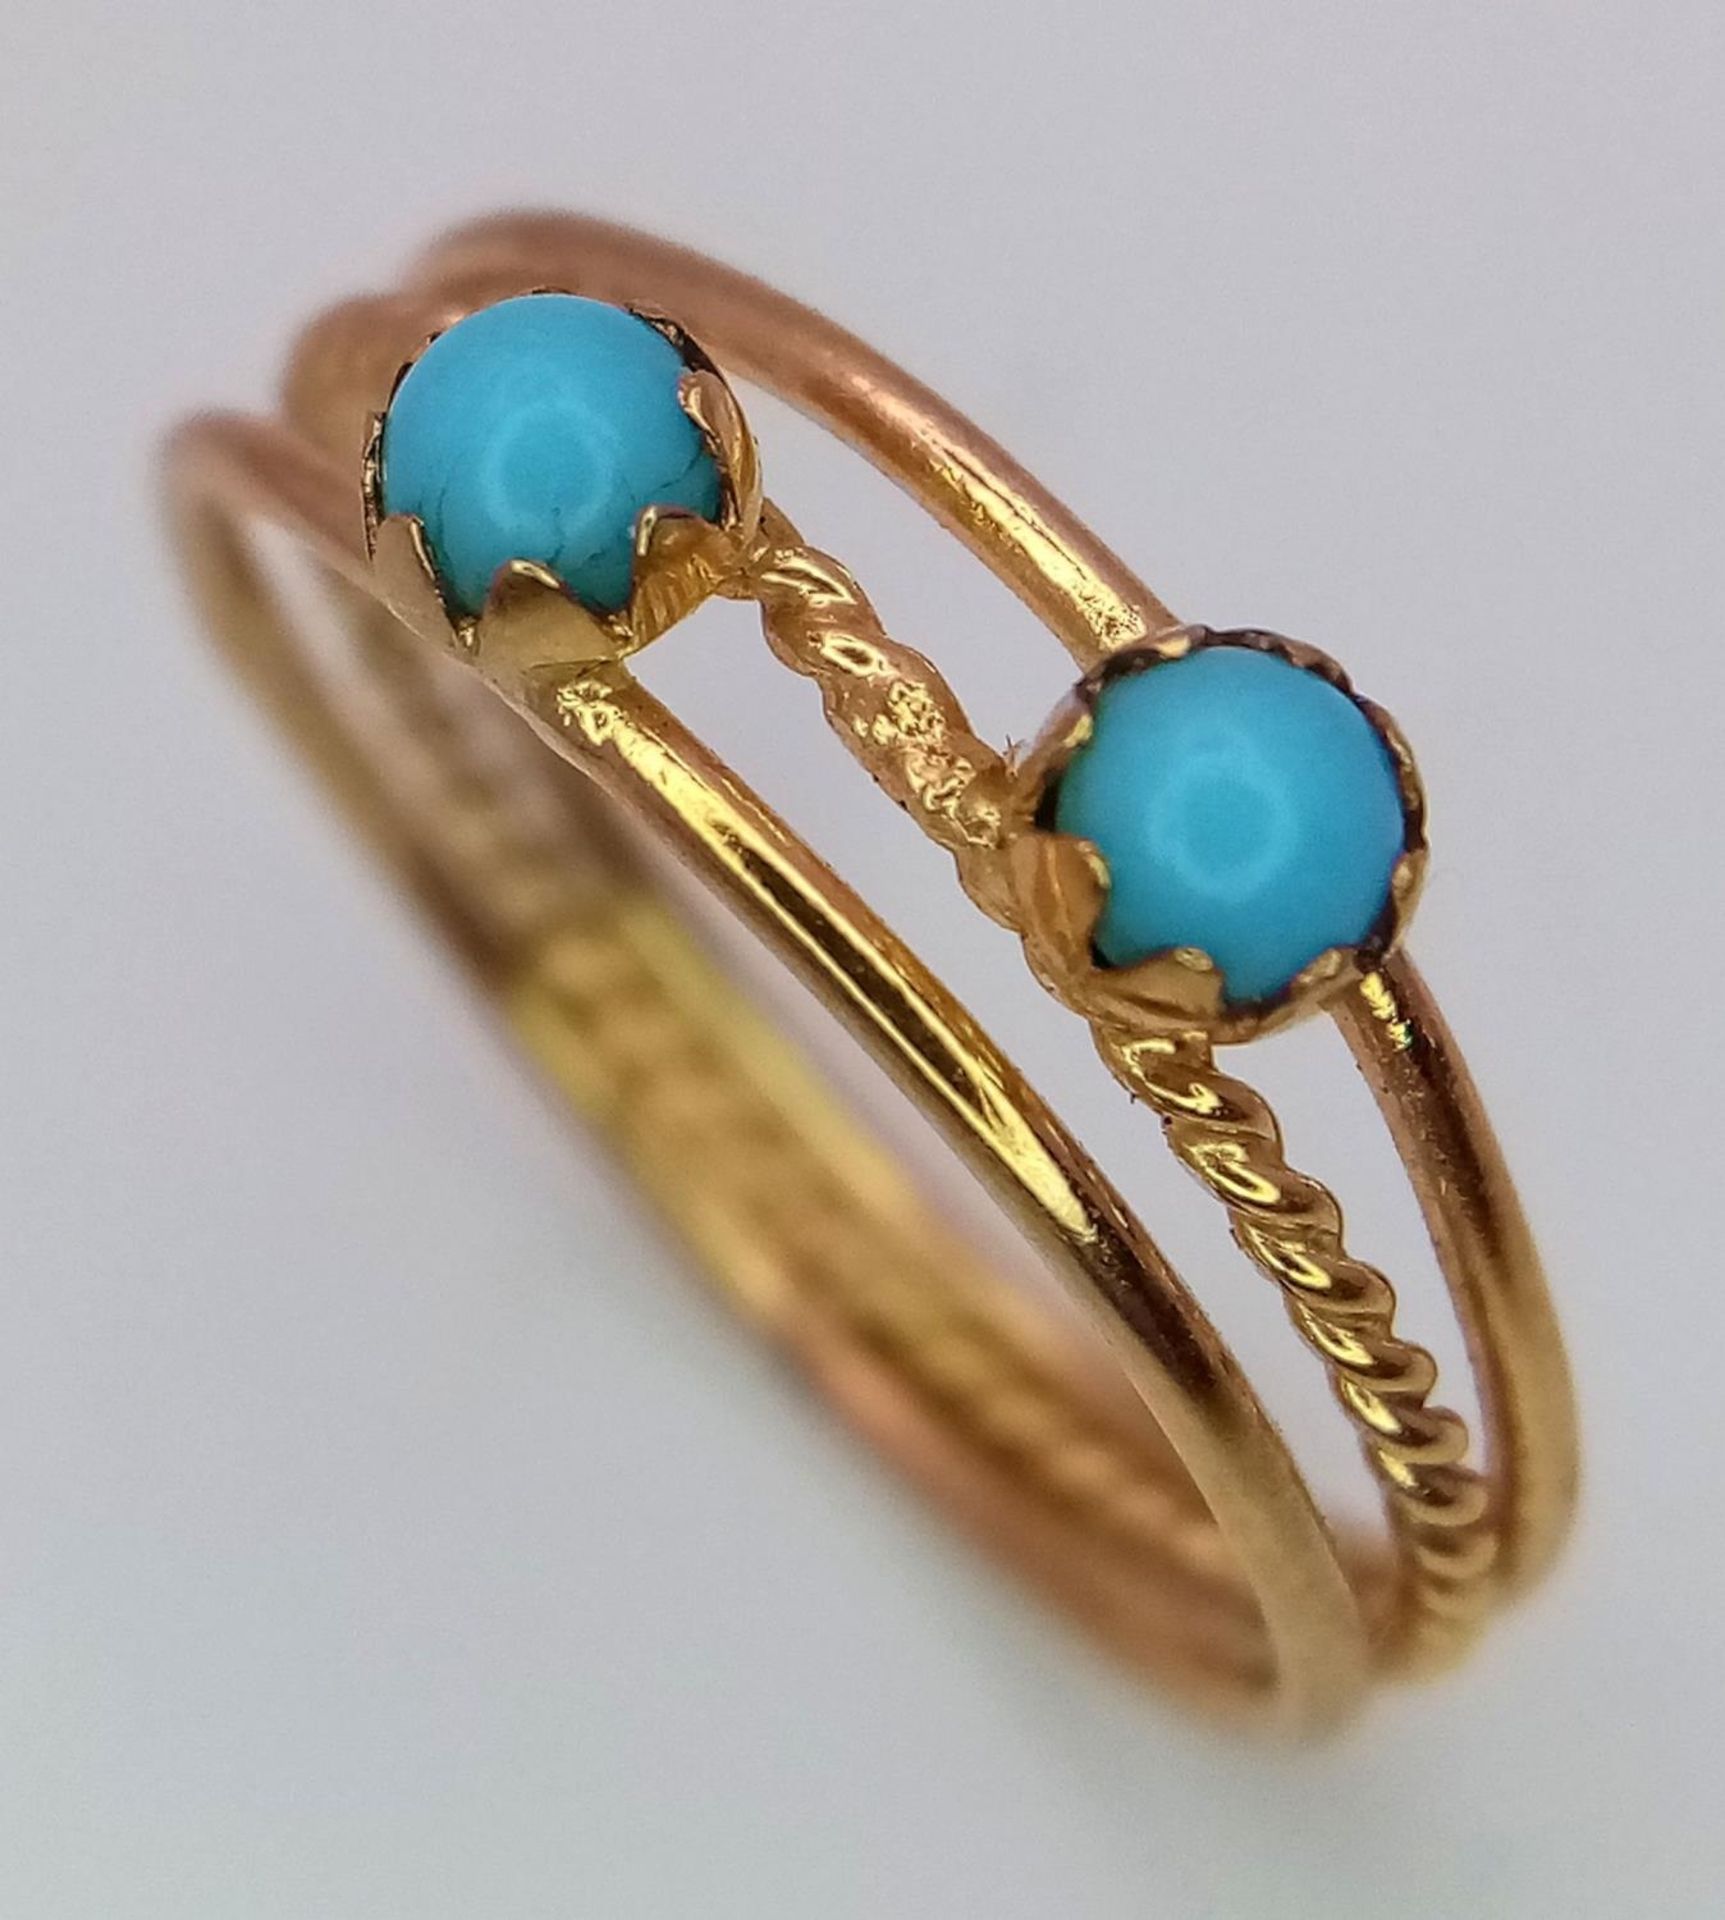 A 16ct Yellow Gold (tested as) Turquoise Band Ring, 4mm turquoise, size I 1/2, 1.6g total weight.